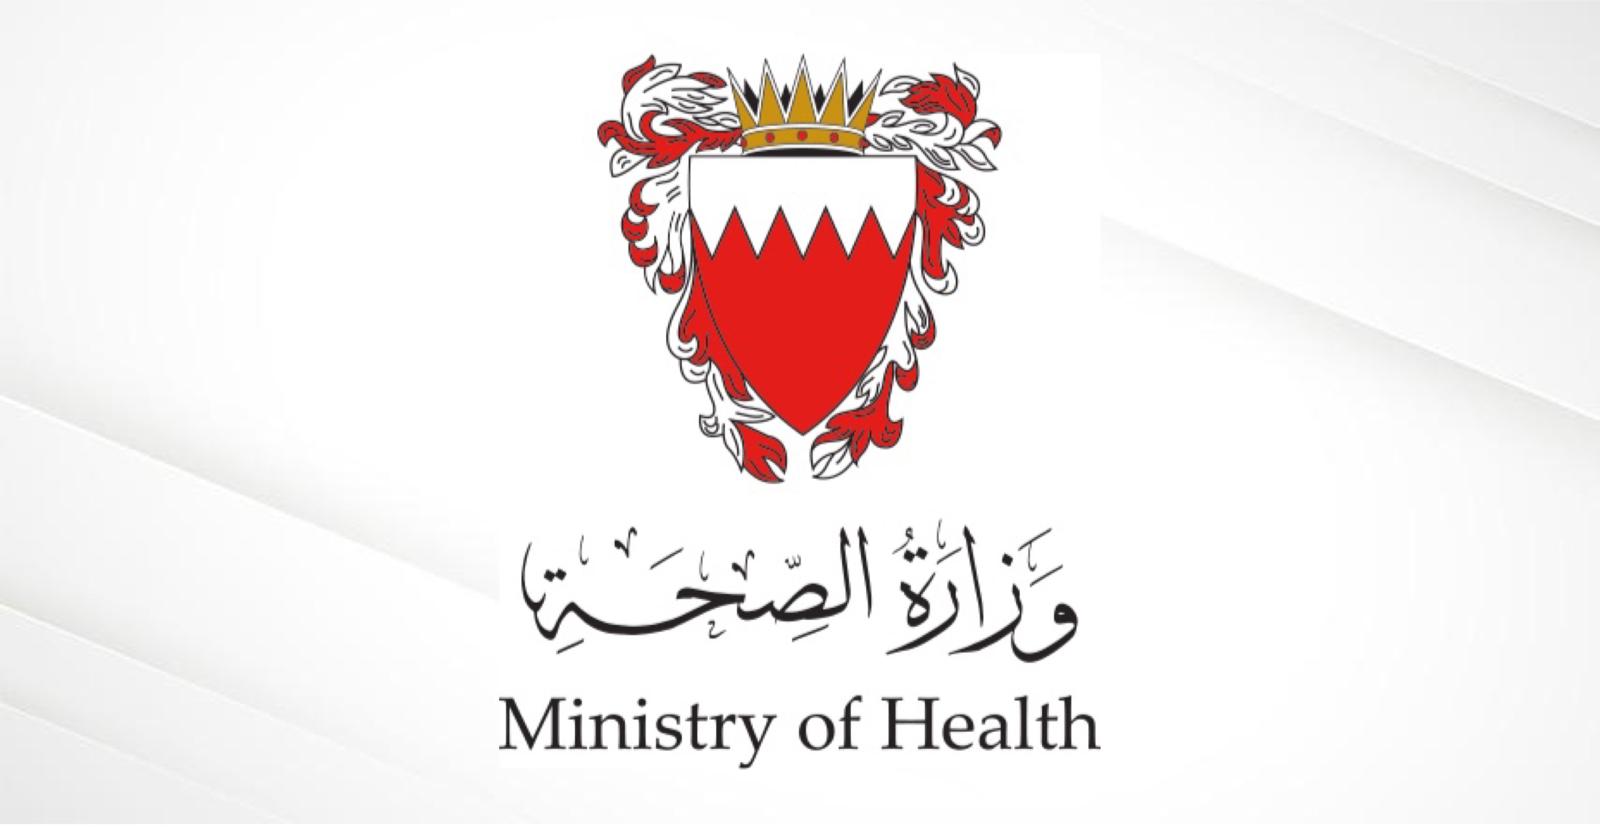 The Ministry of Health announces an update to the COVID-19 daily report starting from Sunday 8th May 2022